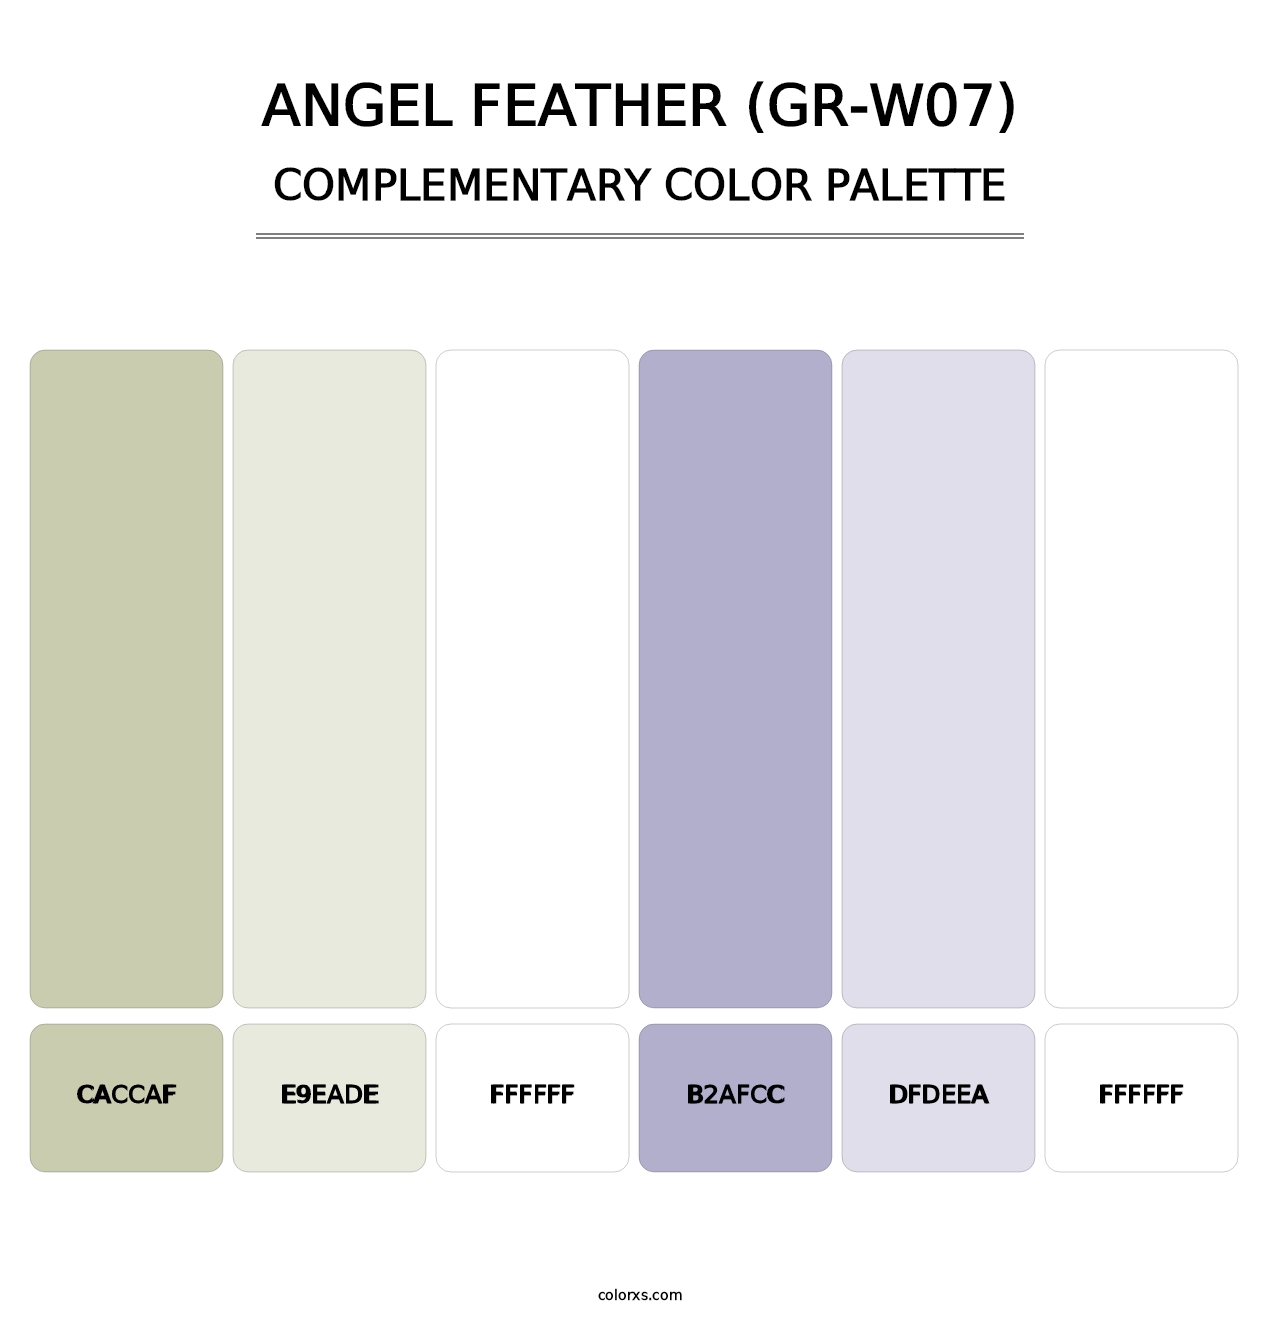 Angel Feather (GR-W07) - Complementary Color Palette